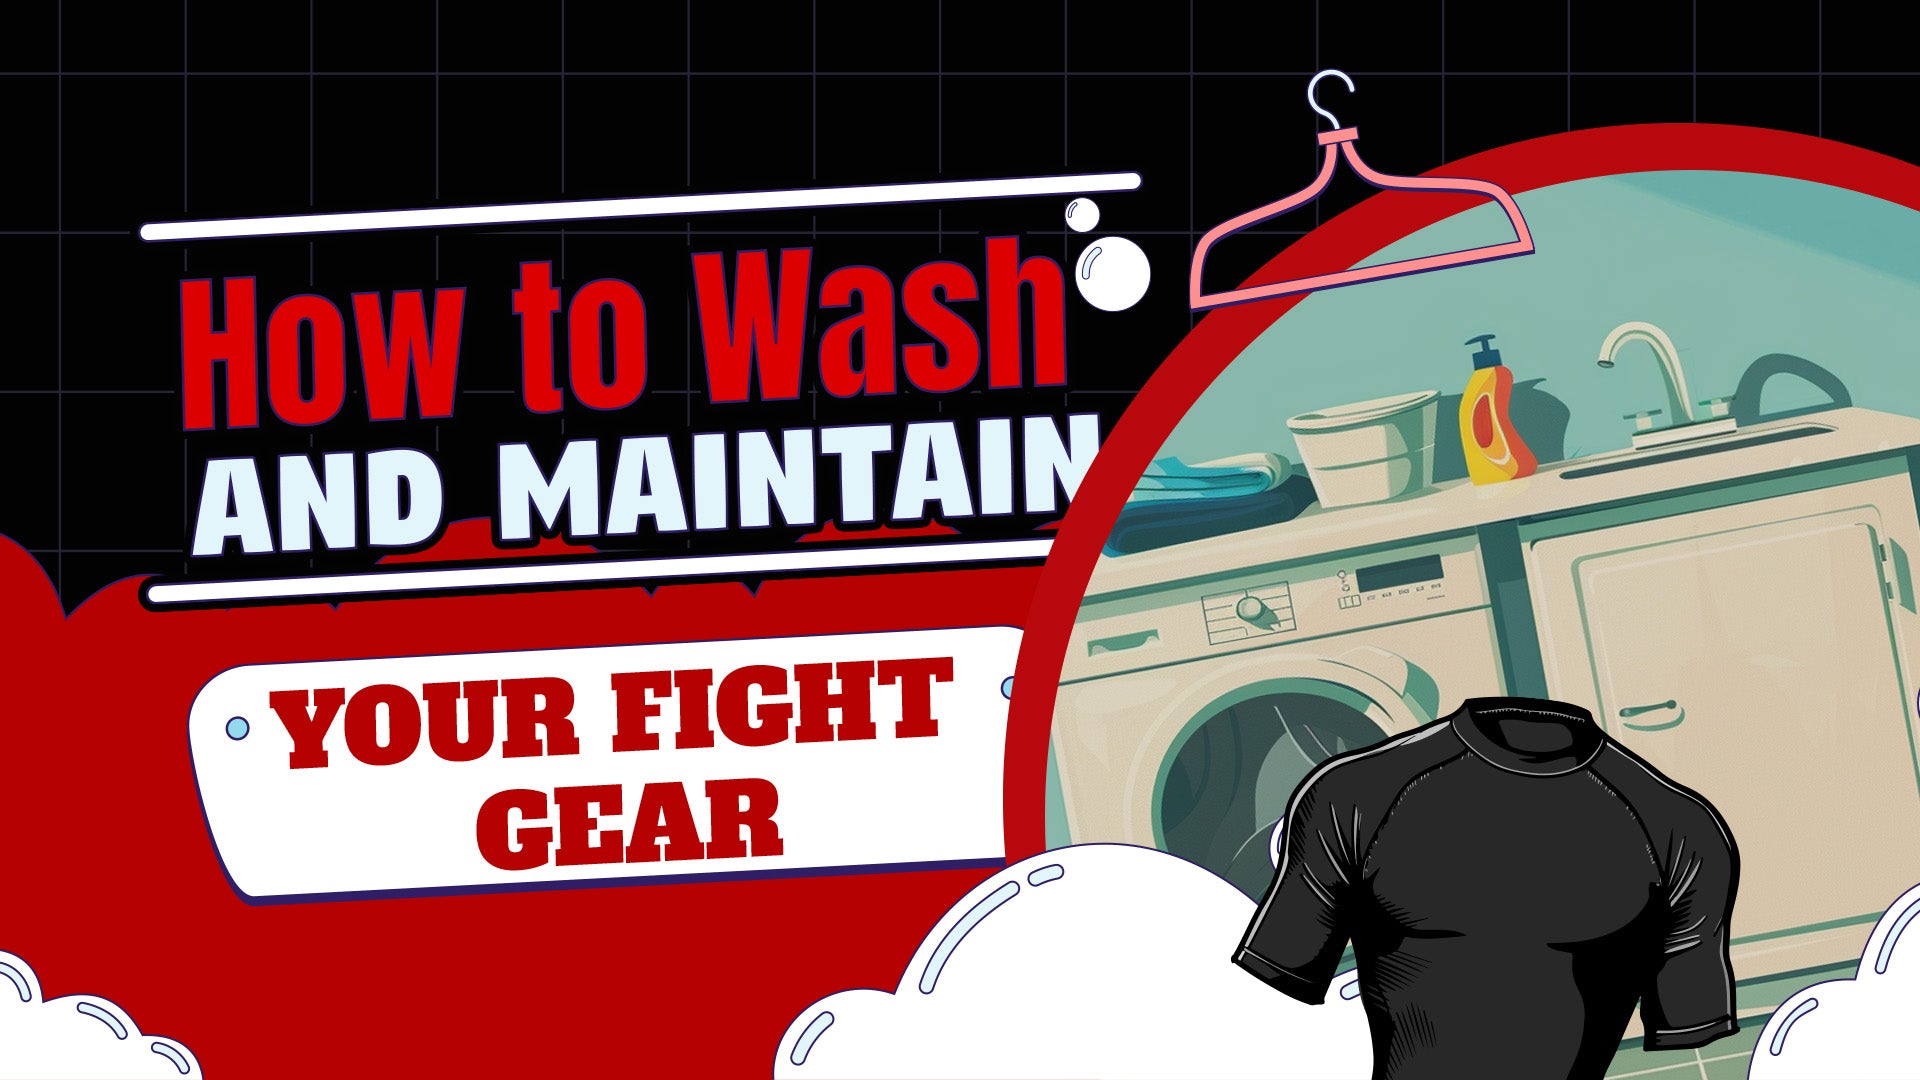 How to Wash and Maintain Your Fight Gear